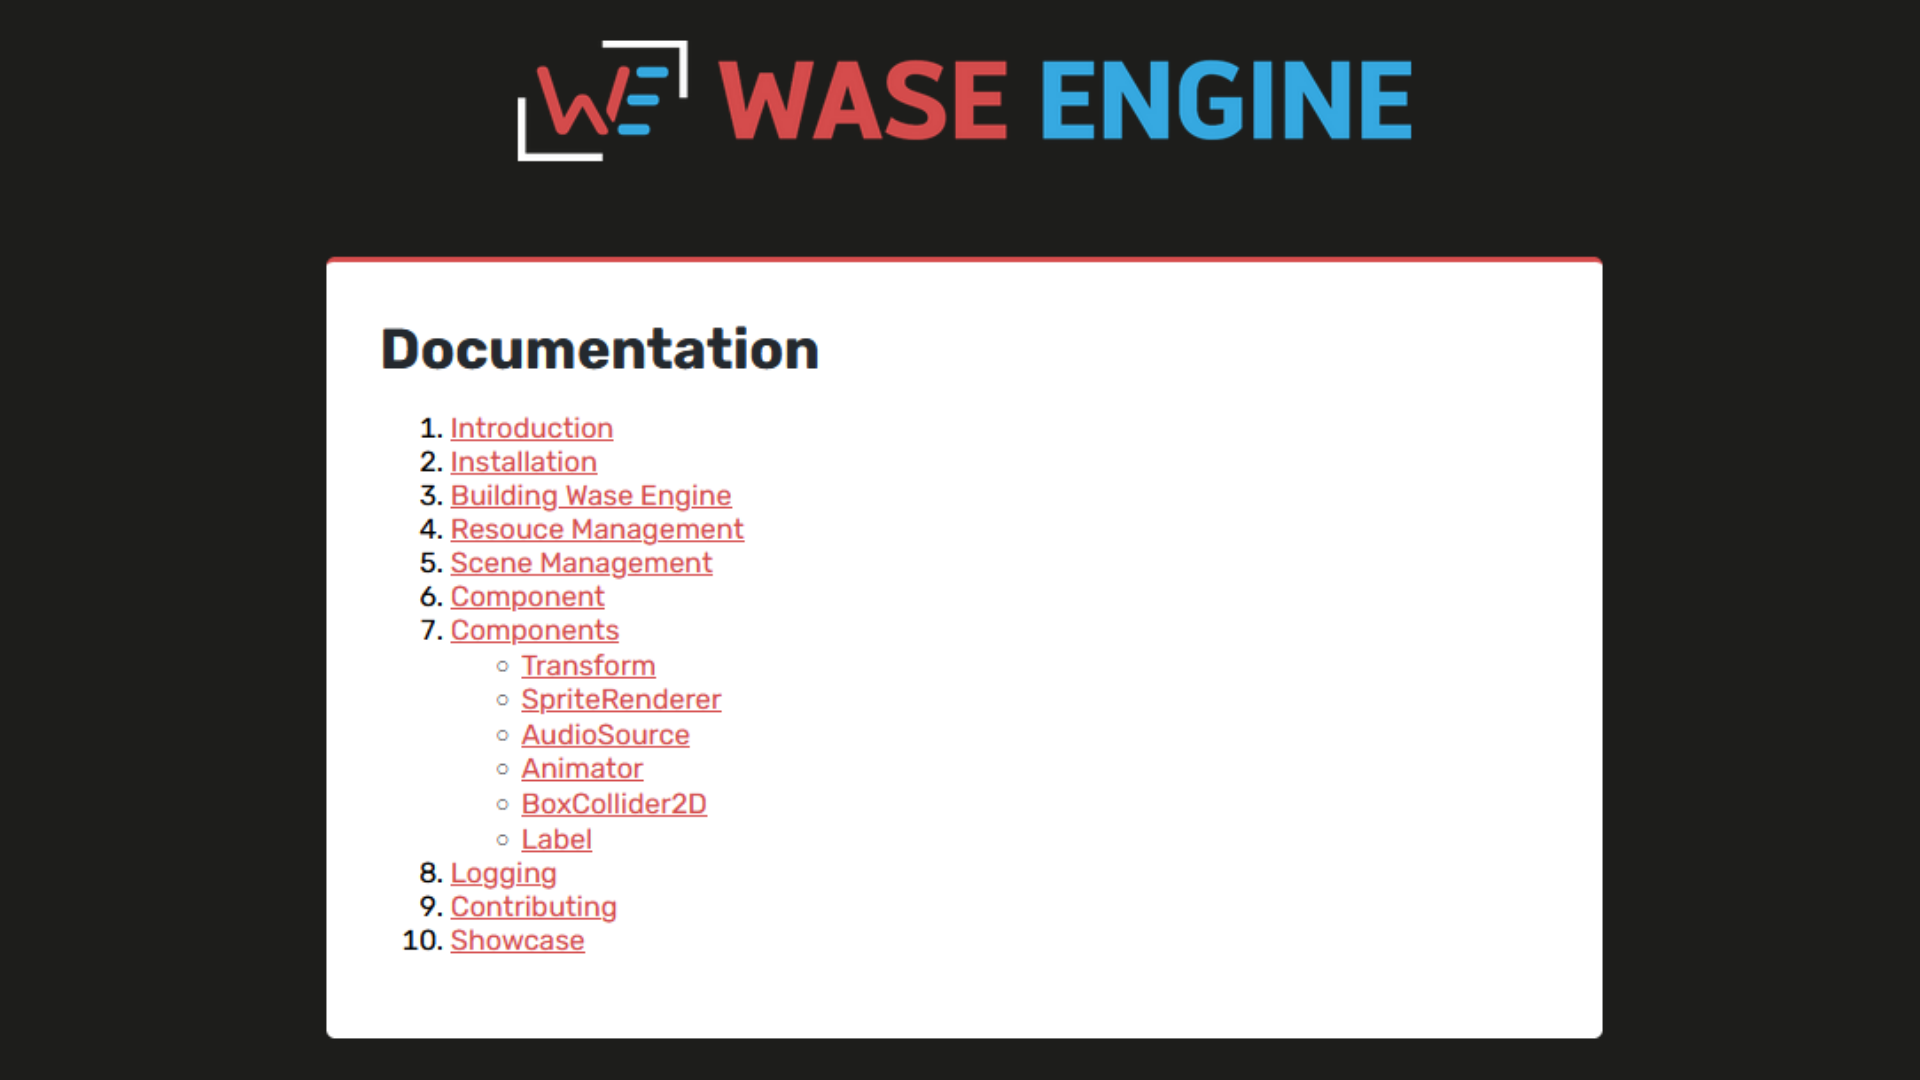 Entirely documented on the Wase Engine website